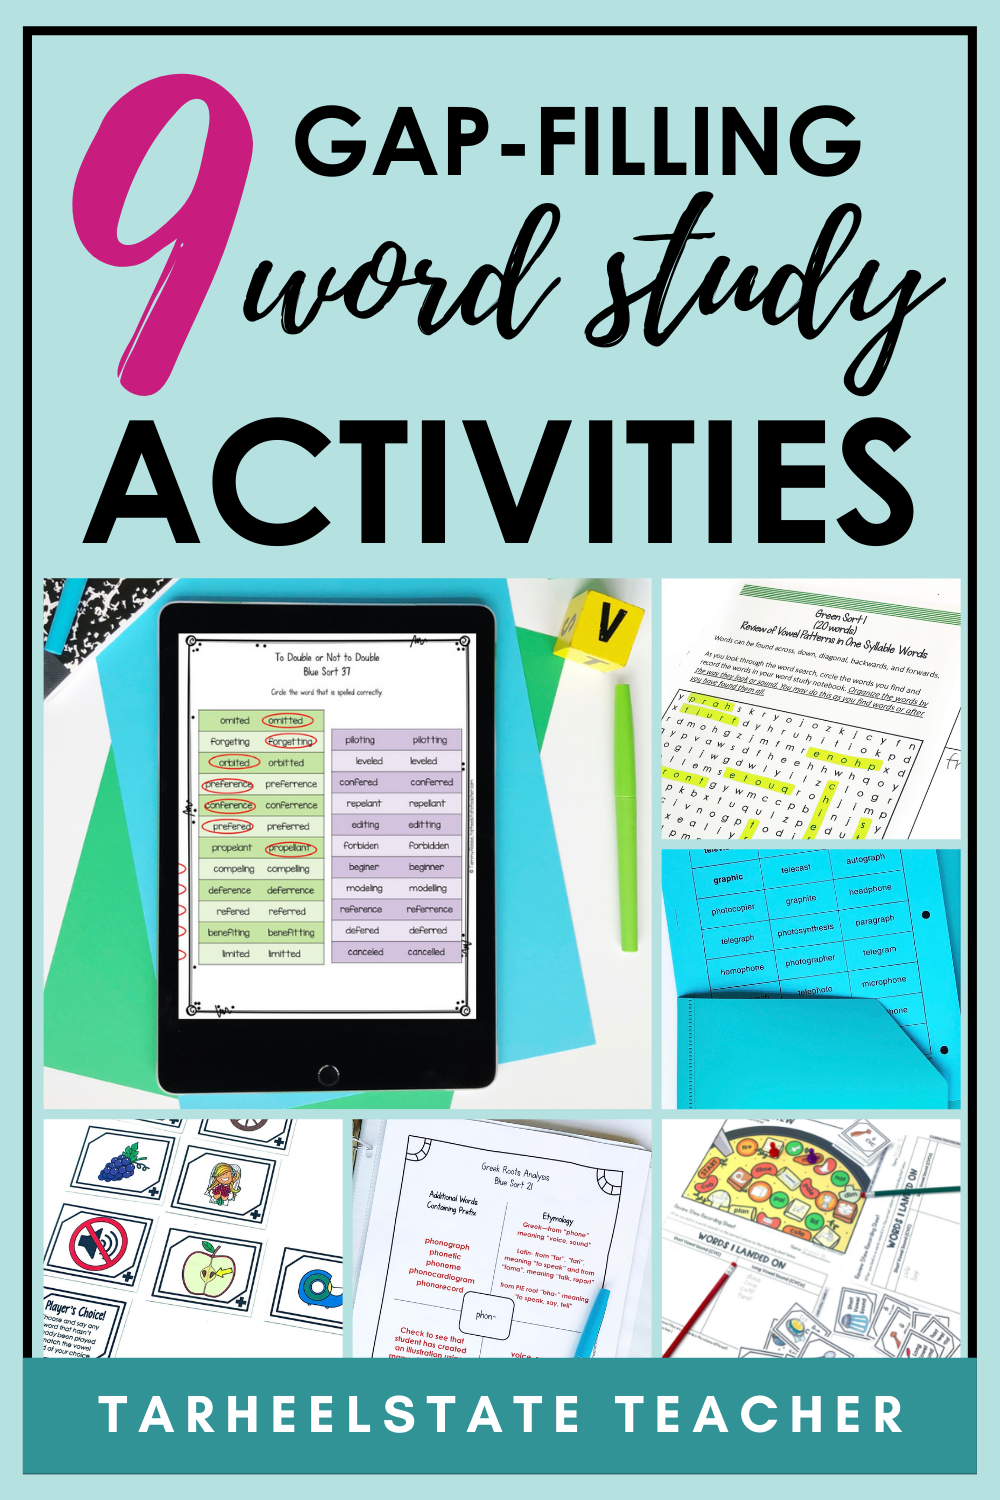 9 activities for words their way upper elementary.png